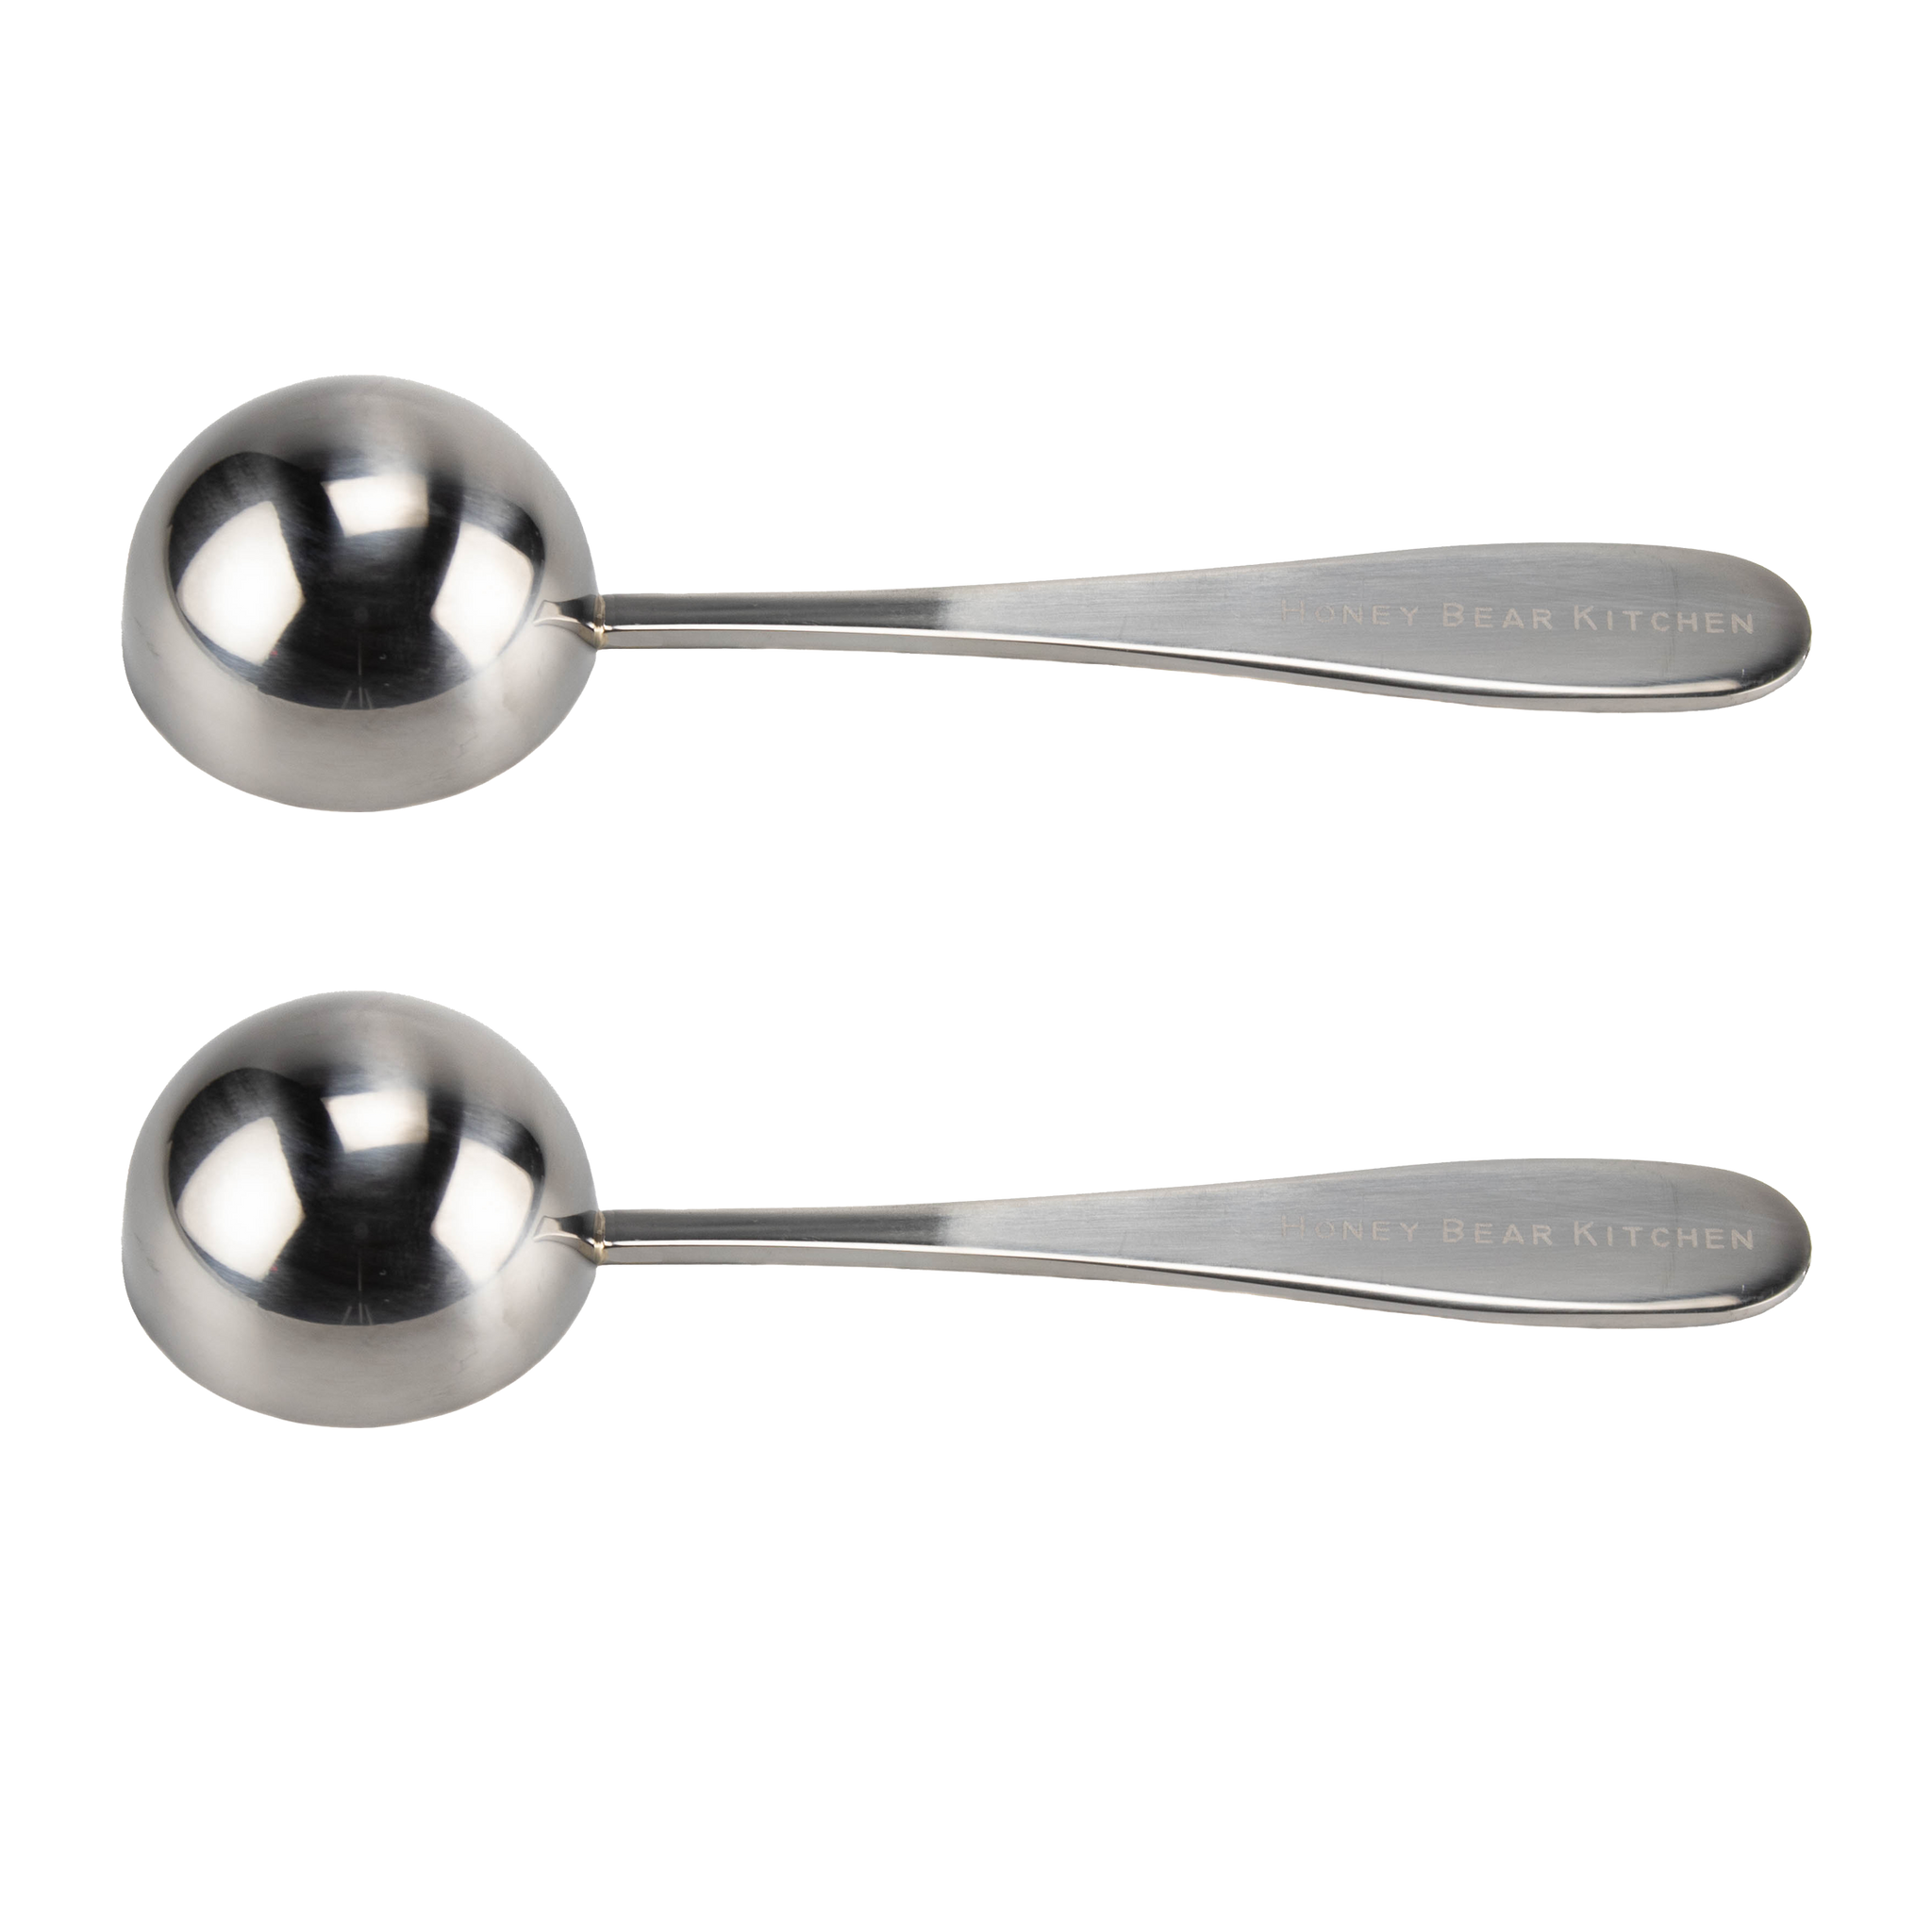 Tablespoon 15 ml Set of 2: Polished Stainless Steel – Honey Bear